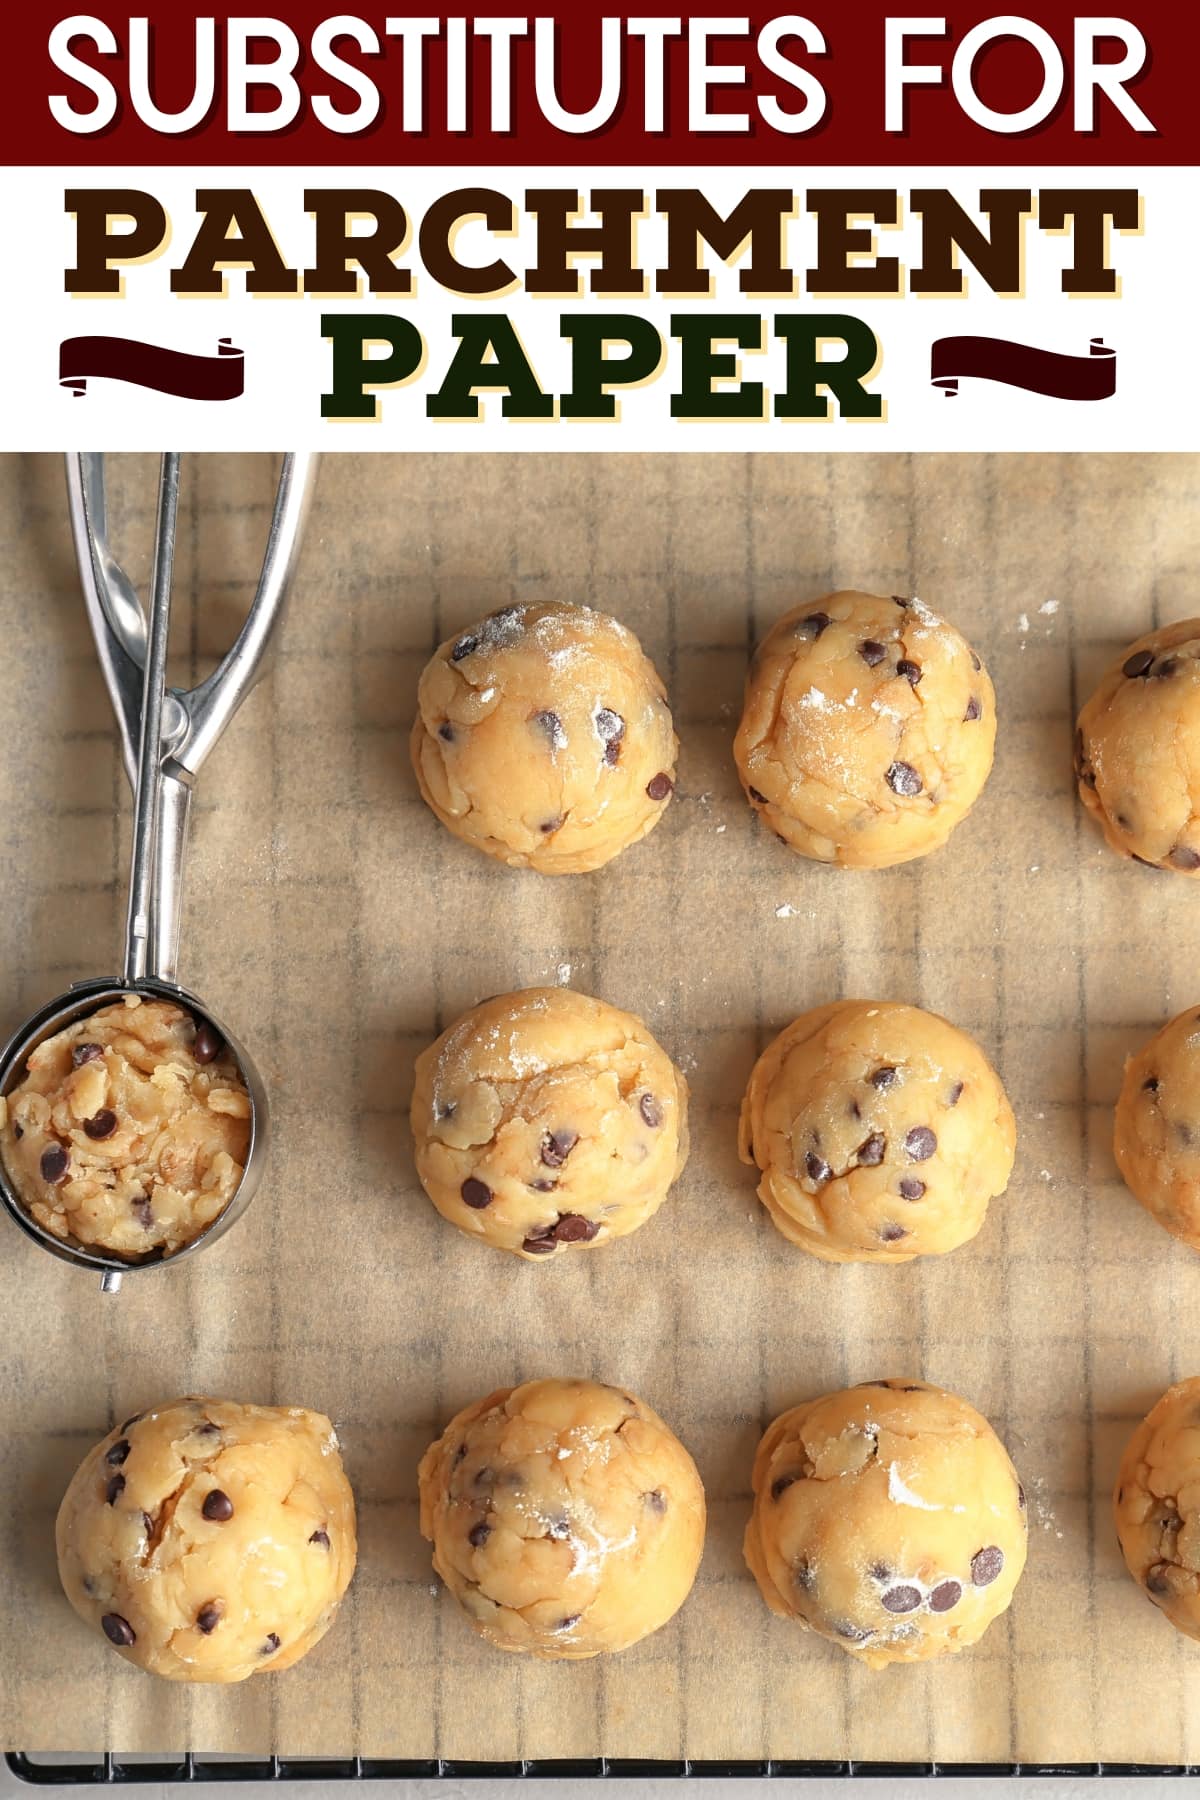 https://insanelygoodrecipes.com/wp-content/uploads/2023/09/Substitutes-for-Parchment-Paper-1.jpg